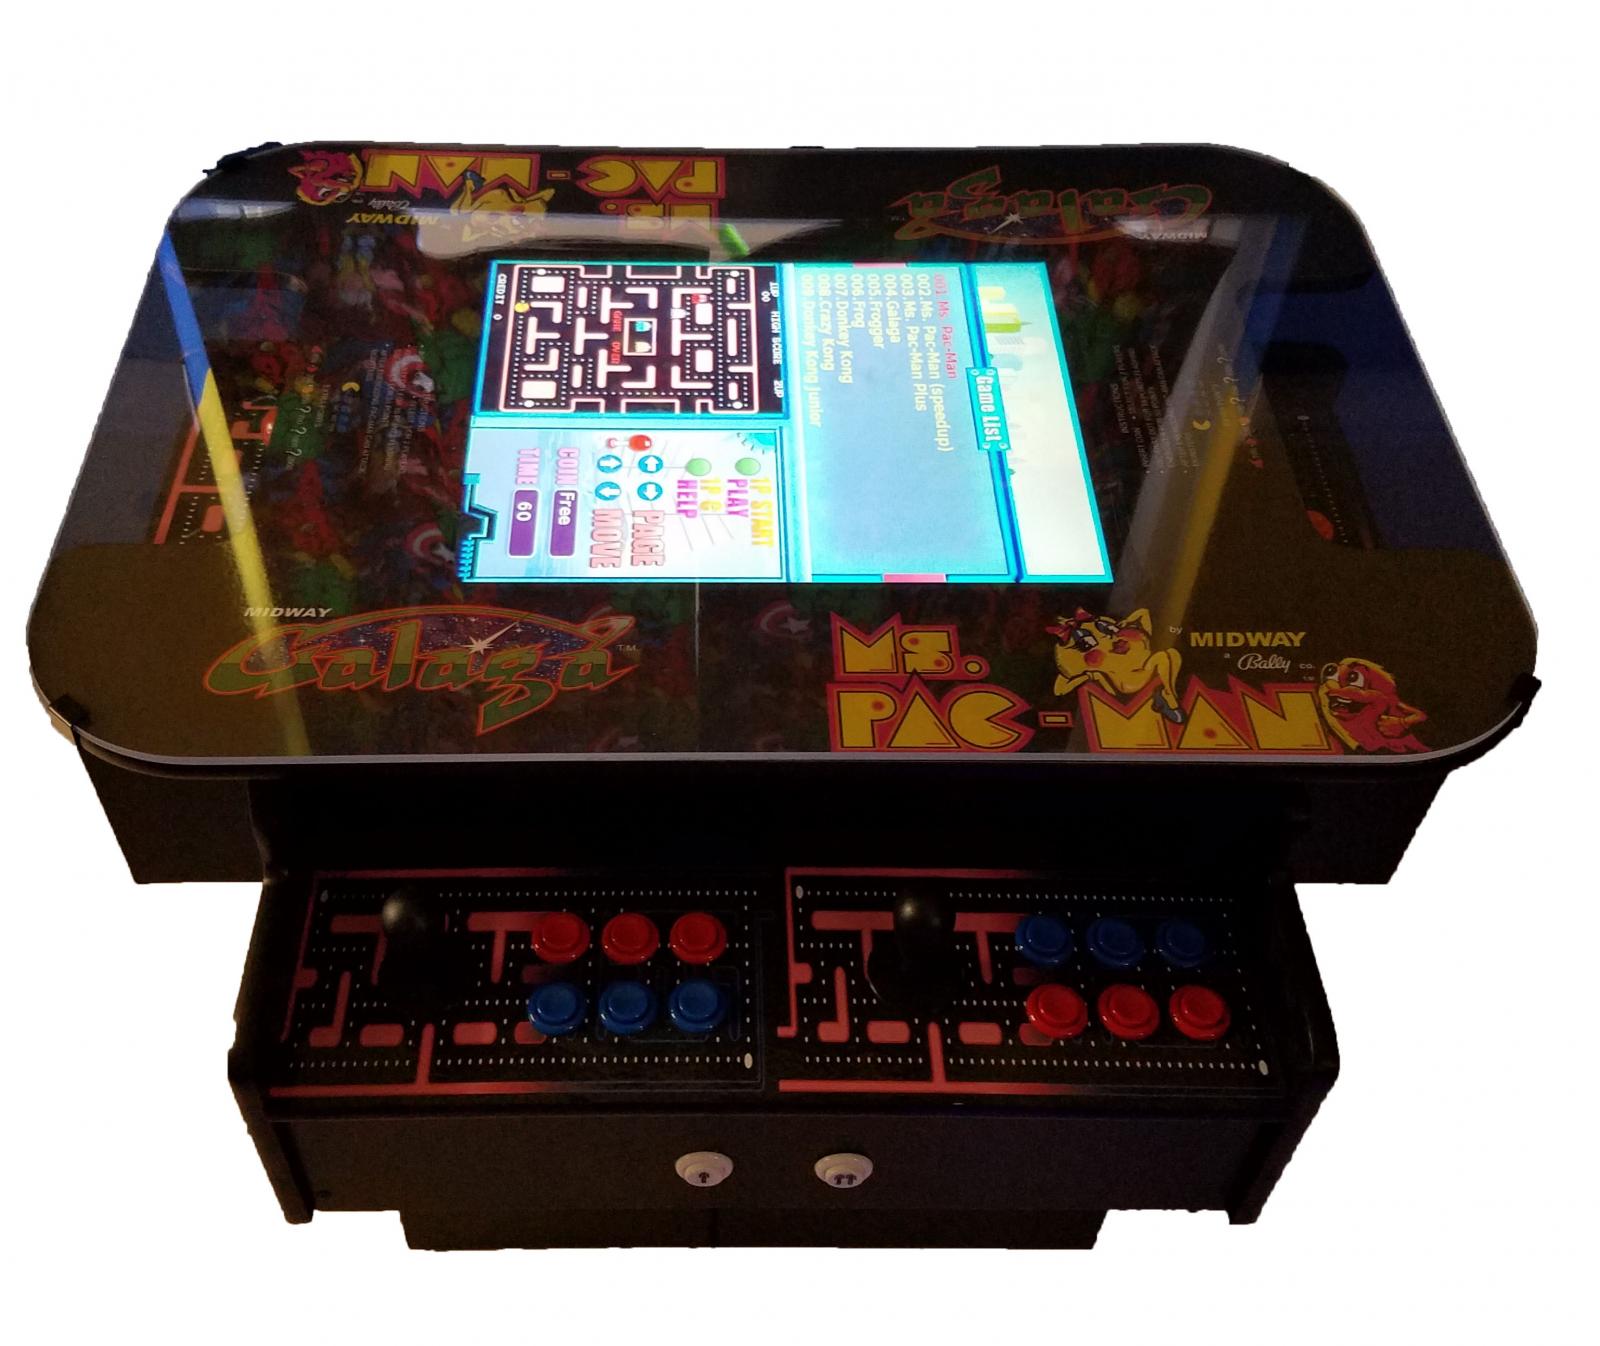 3 Sided Cocktail Arcade Machine With 1000+ Games | eBay1600 x 1346